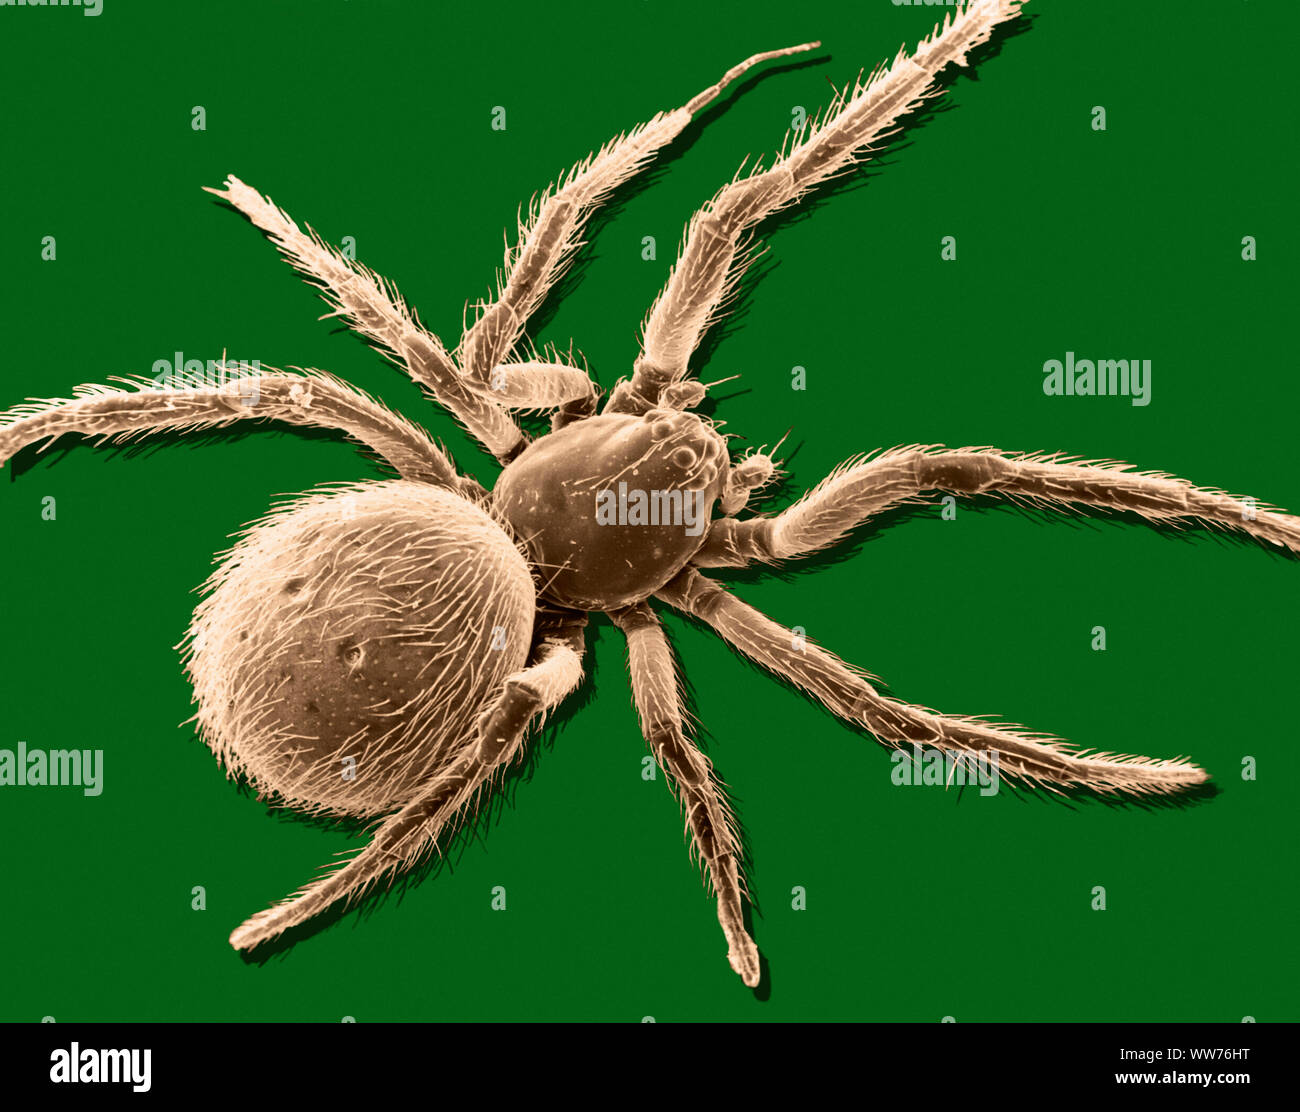 Scanning Electron Microscope image of a Spider (12 x magnification, computer enhanced) Stock Photo